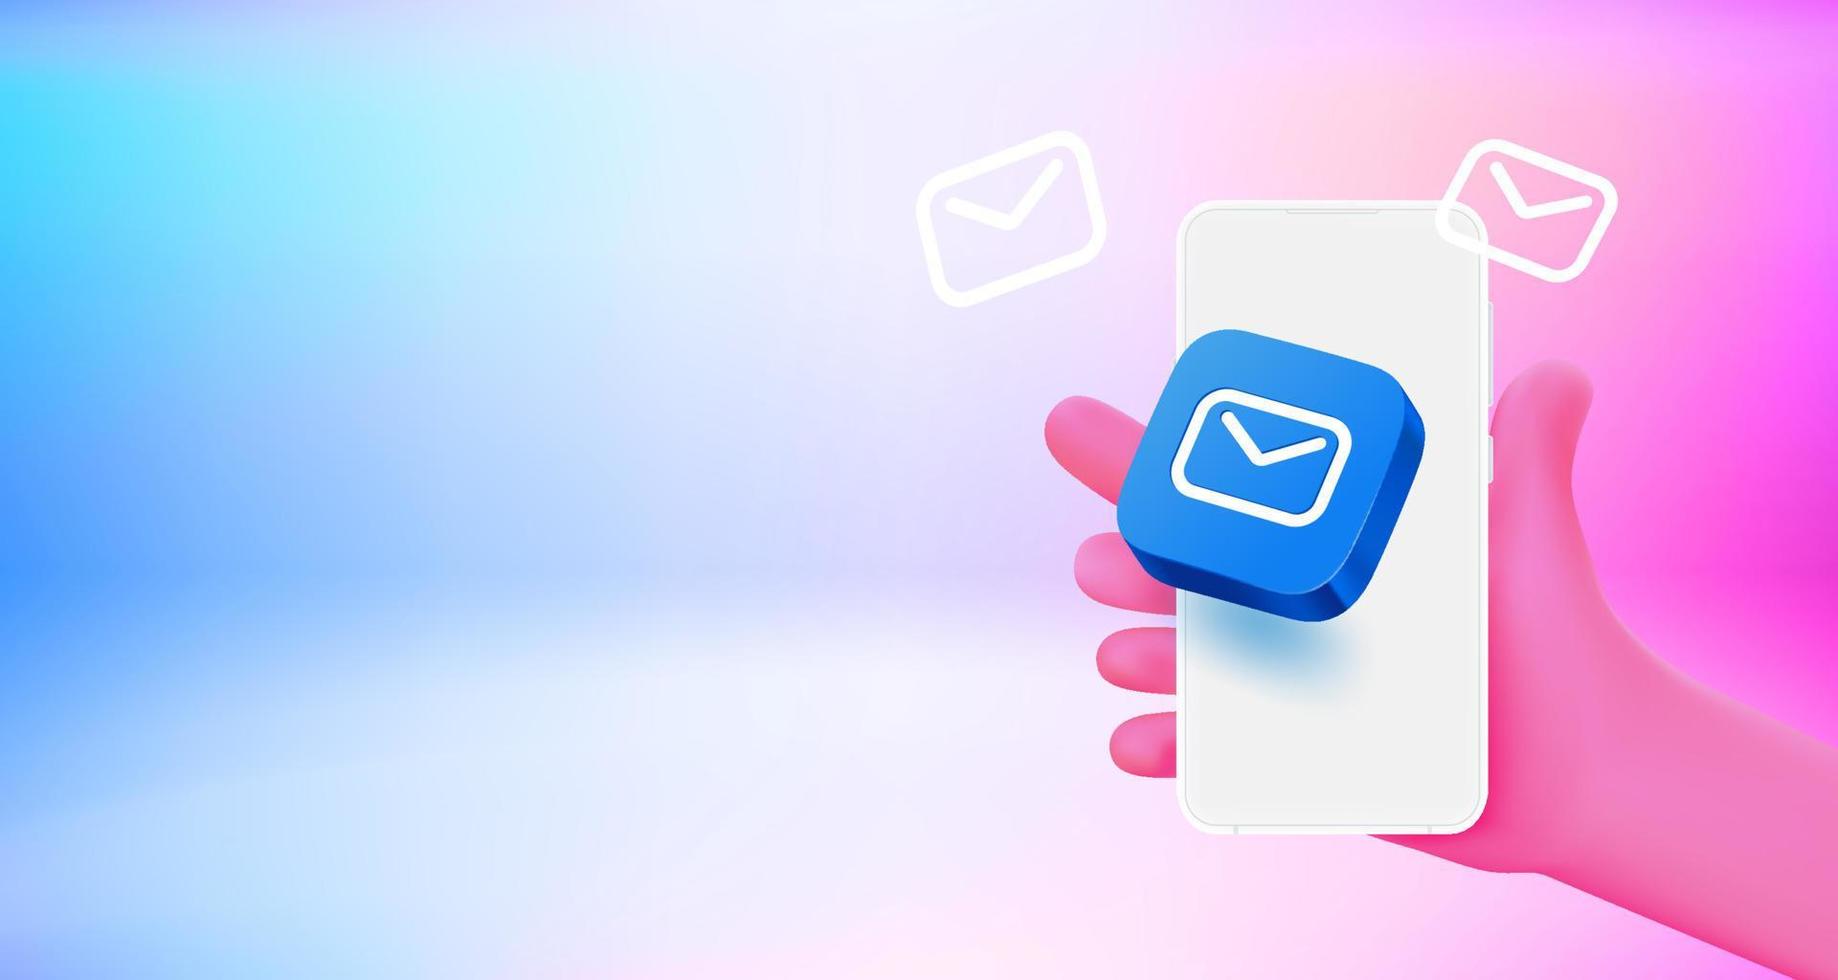 Using mailing application on mobile phone. 3d vector banner with copy space